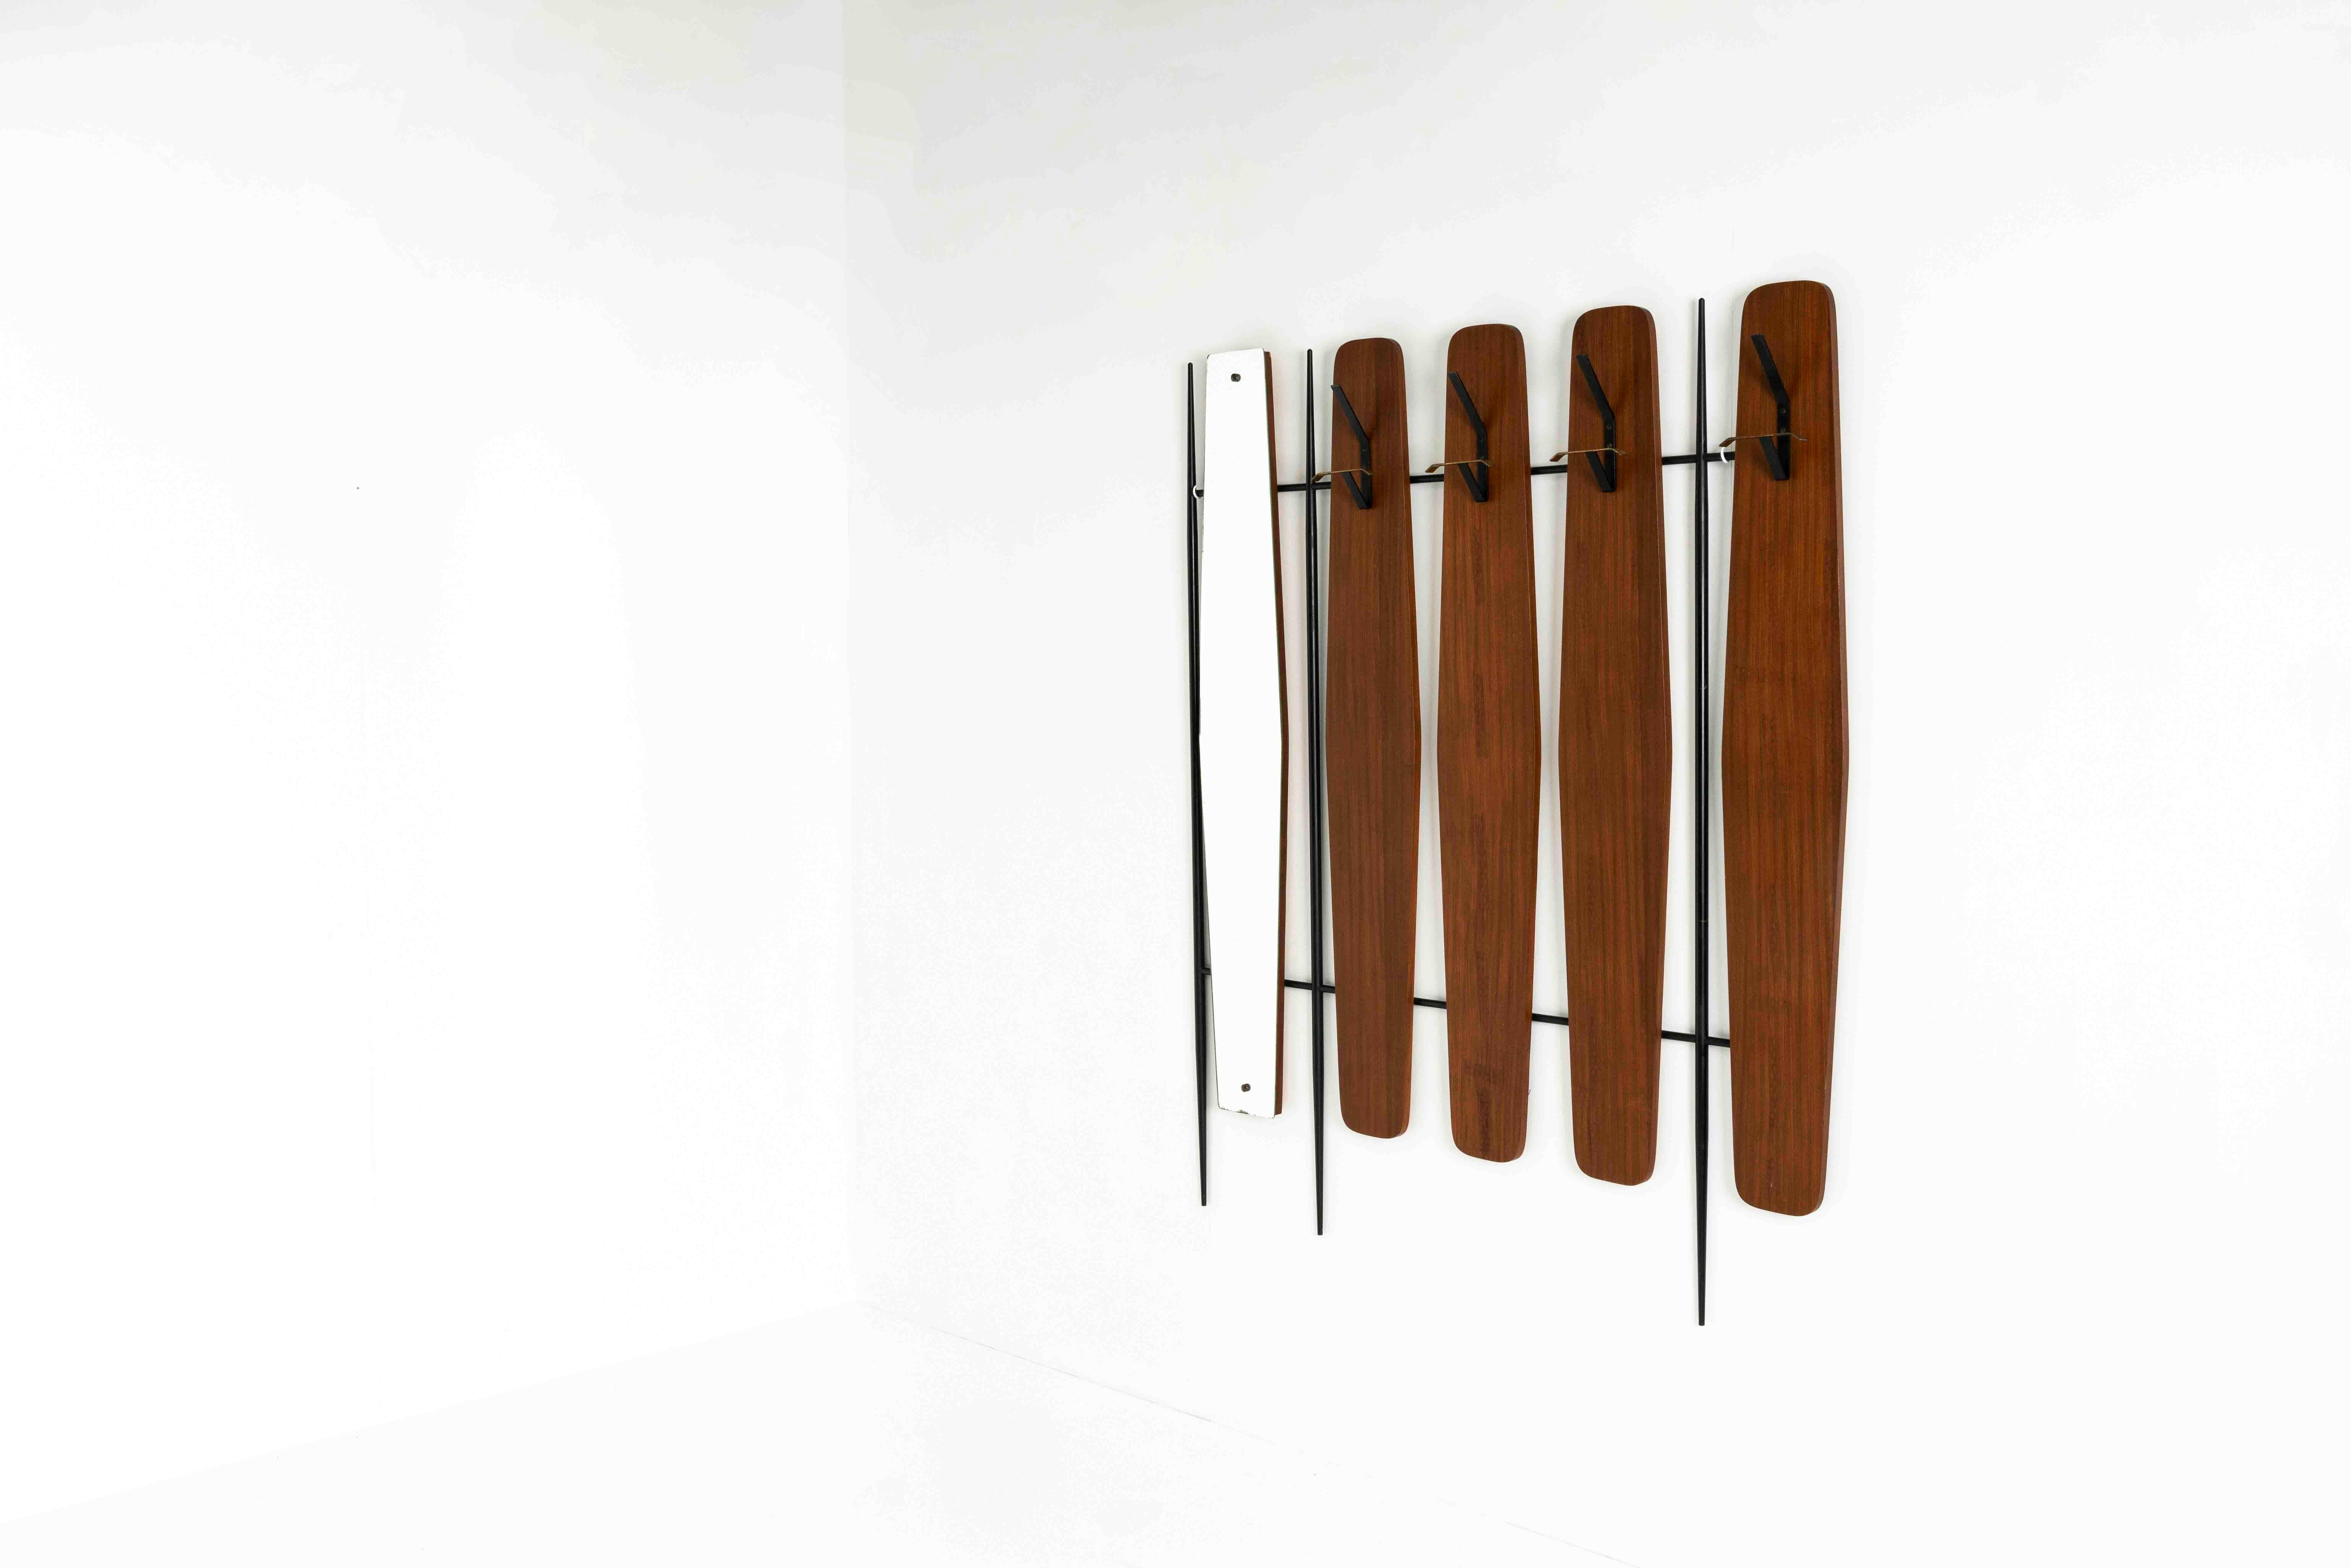 Italian Vintage Coat Rack with Mirror in the Style of Osvaldo Borsani from 1950s Italy. The coat rack features a mirror and multiple copper hooks for coats and hats. This coat rack can be mounted to the wall and has a base of black-coloured steel.